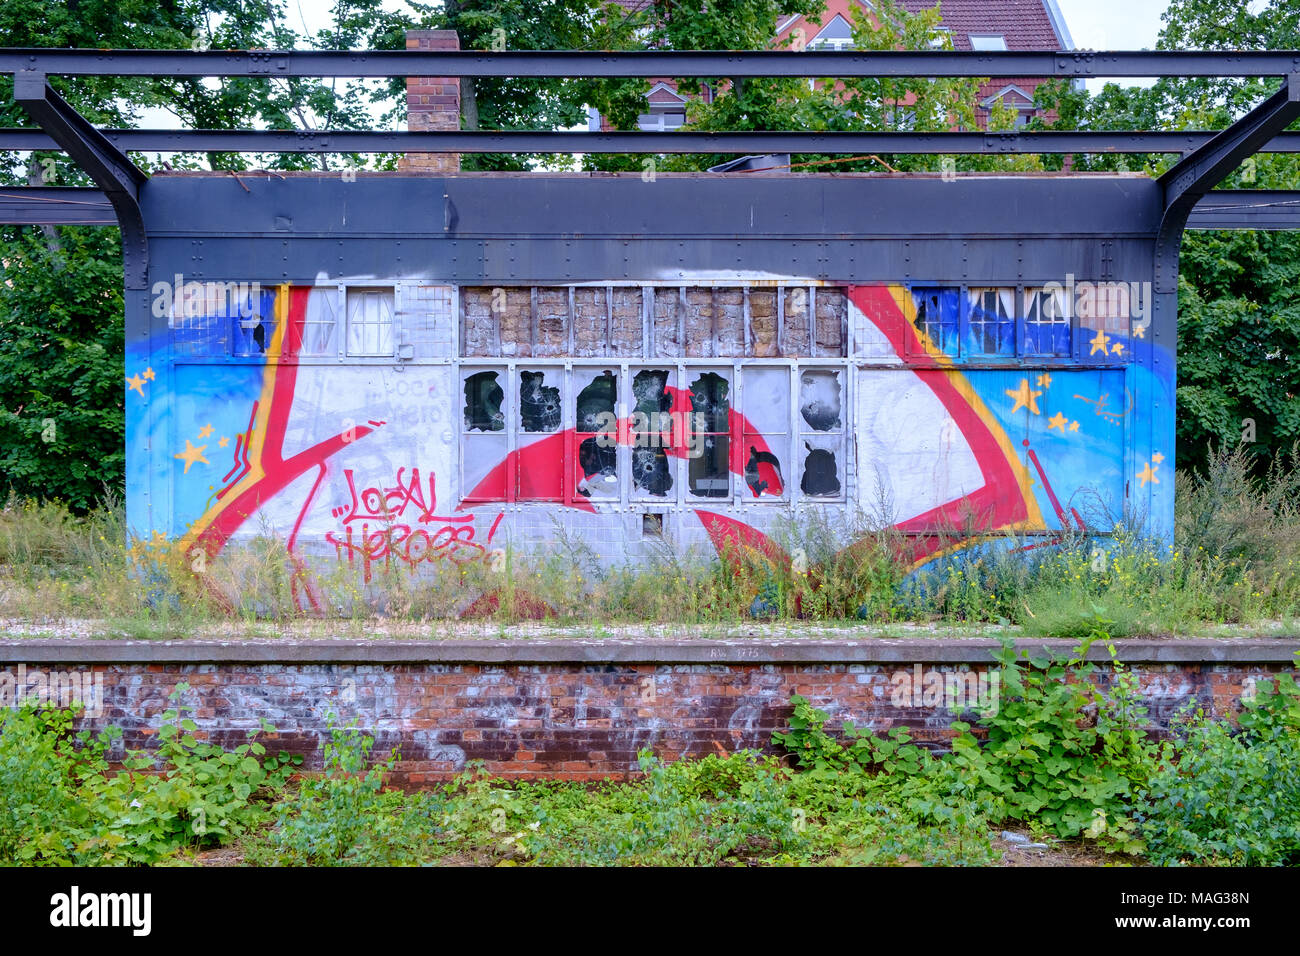 Abandoned decaying platform at S Zehlendorf commuter rail station in Berlin, Germany. Stock Photo